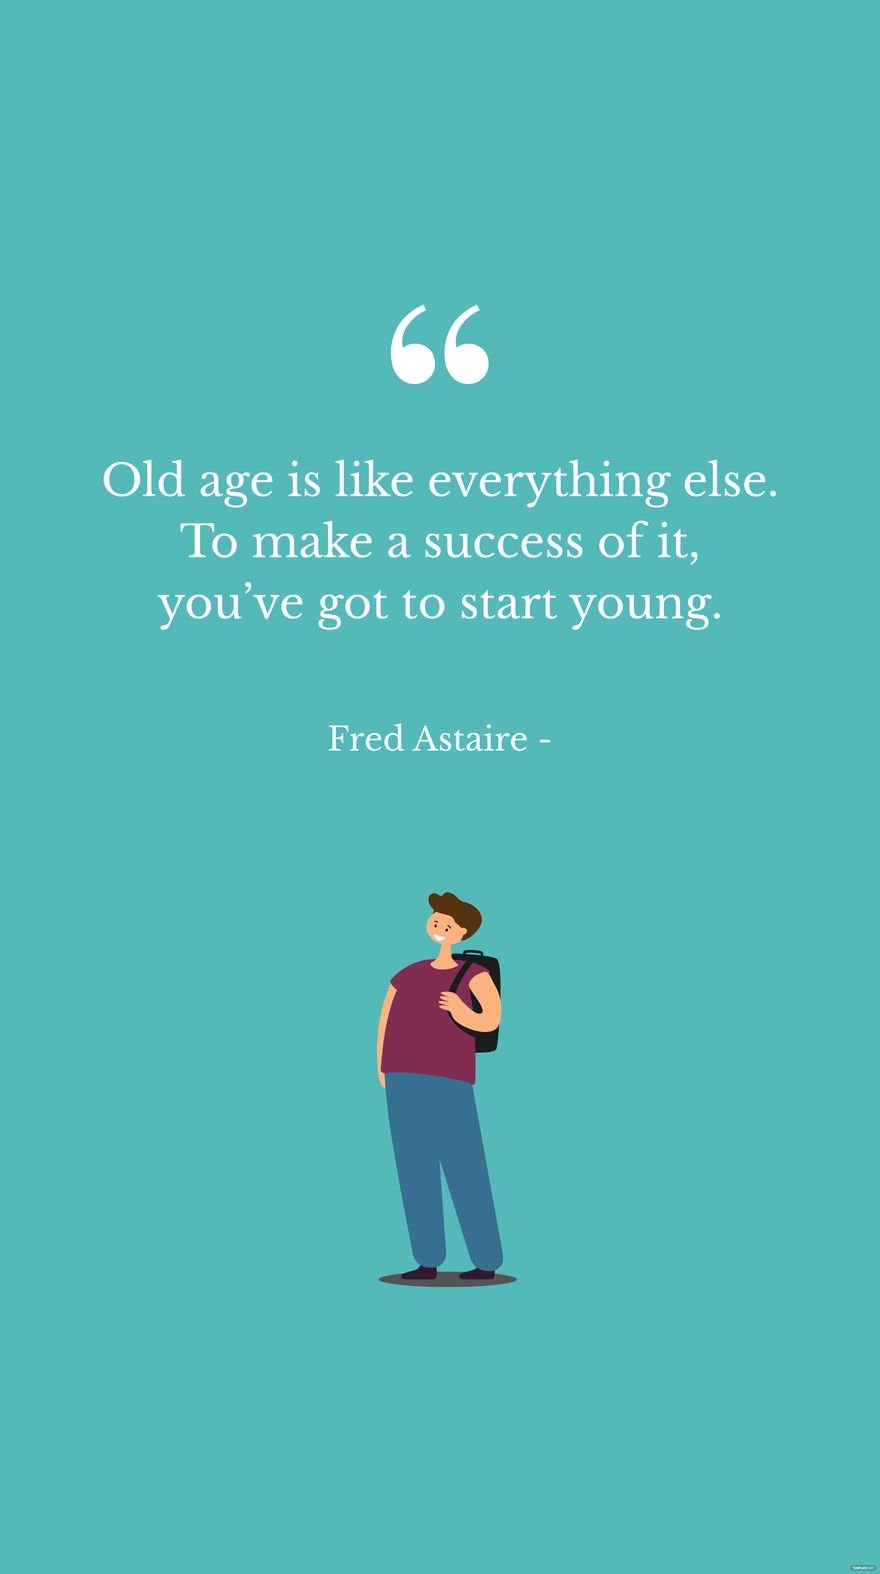 Fred Astaire - Old age is like everything else. To make a success of it, you’ve got to start young. in JPG